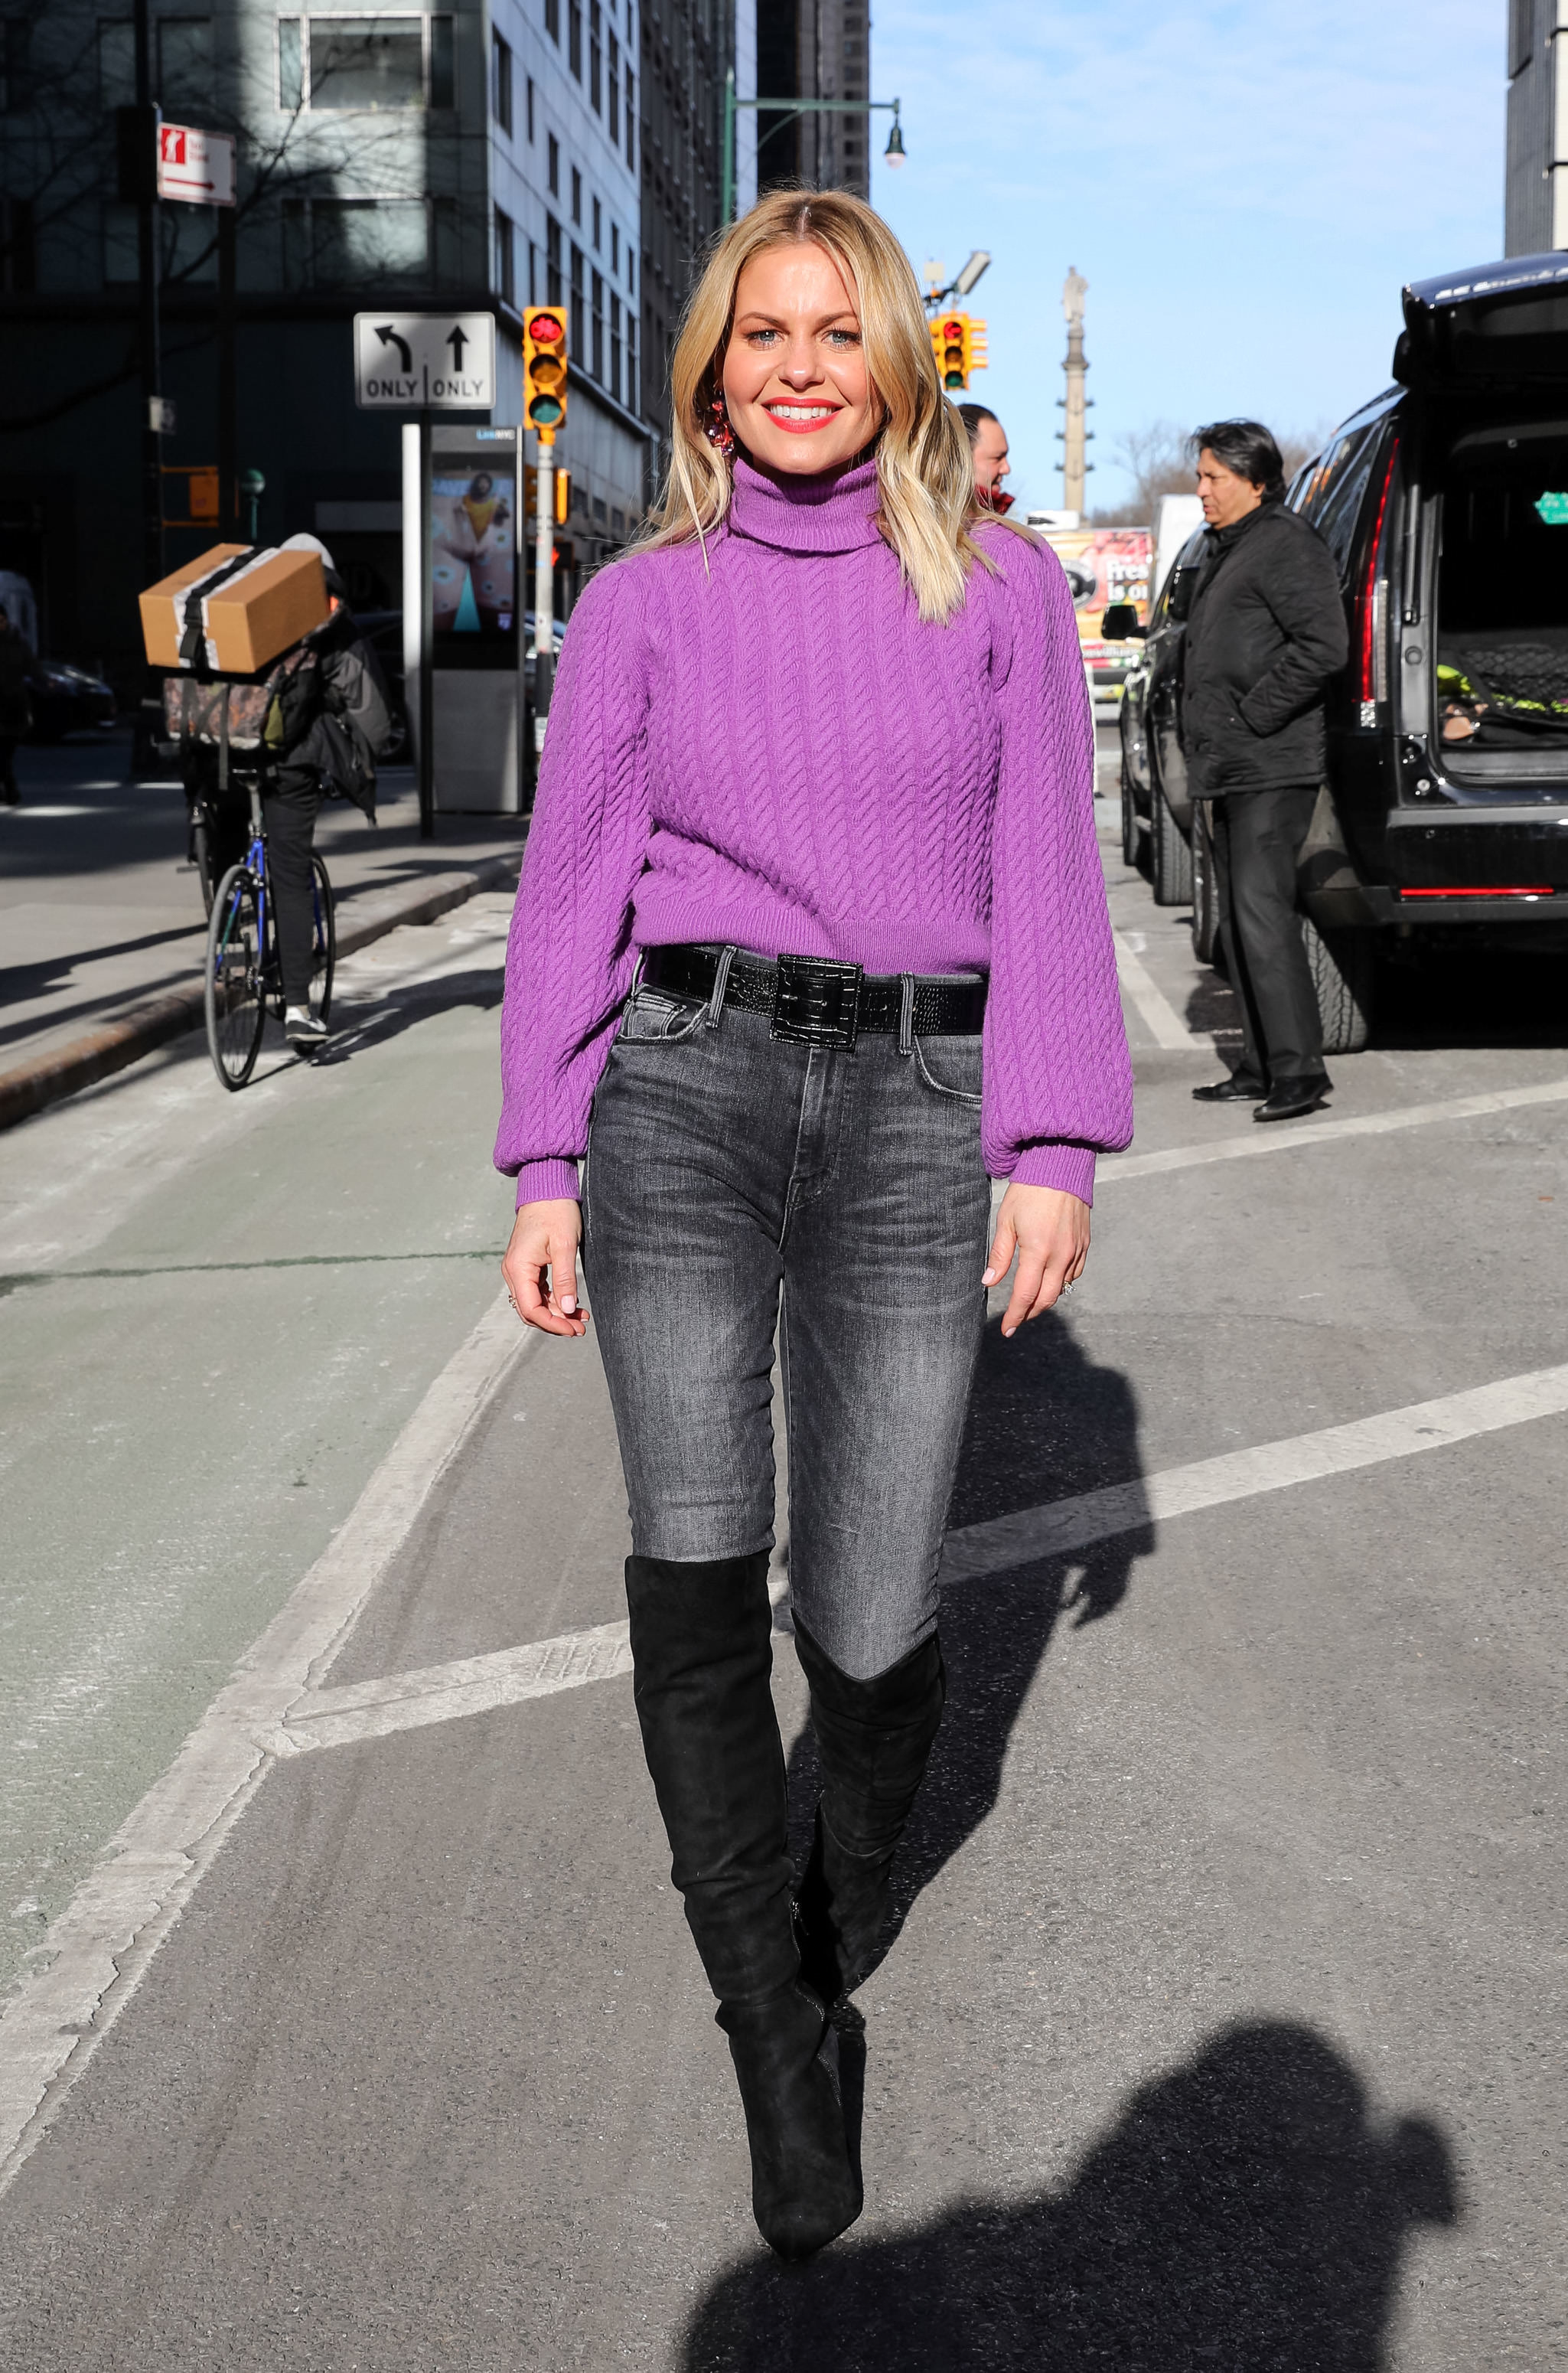 Candace smiles as she poses for a photograph in a long-sleeved sweater top and jeans and boots